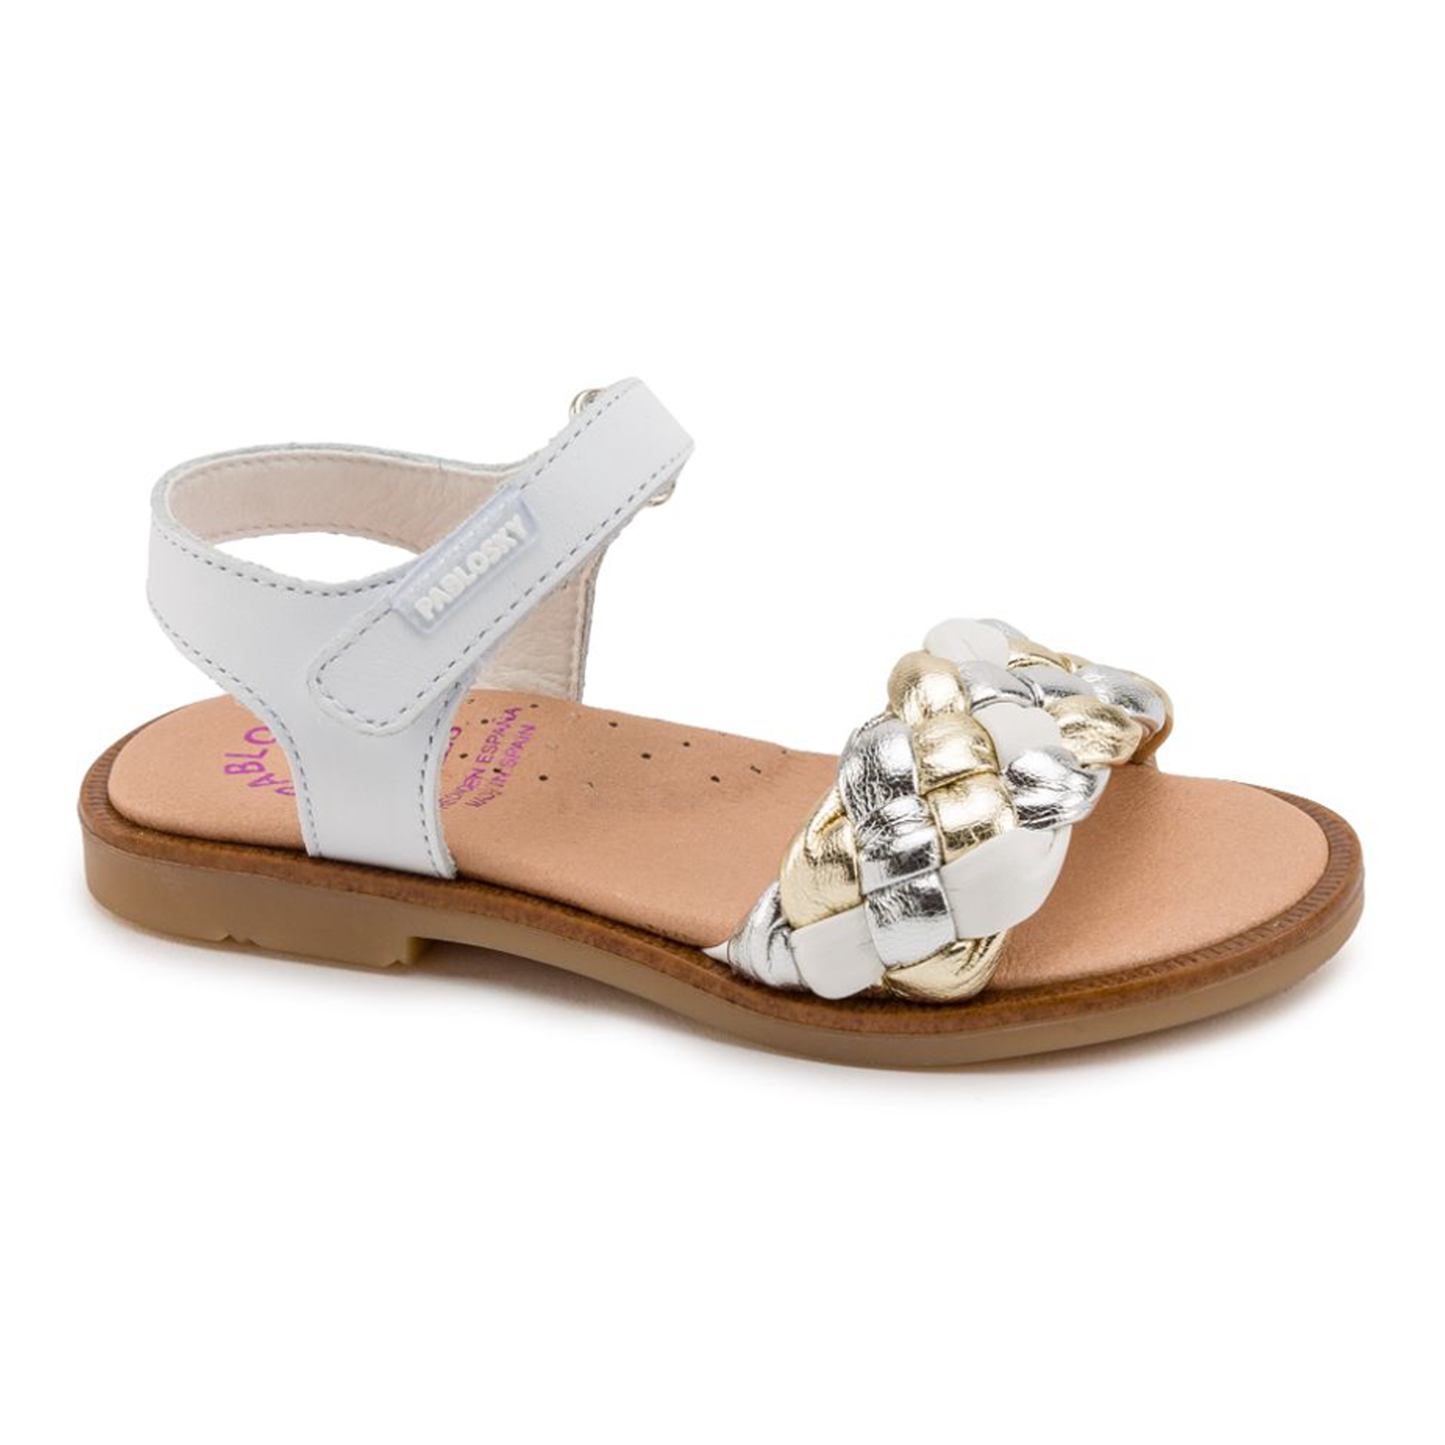 Pablosky Olimpo Sandals